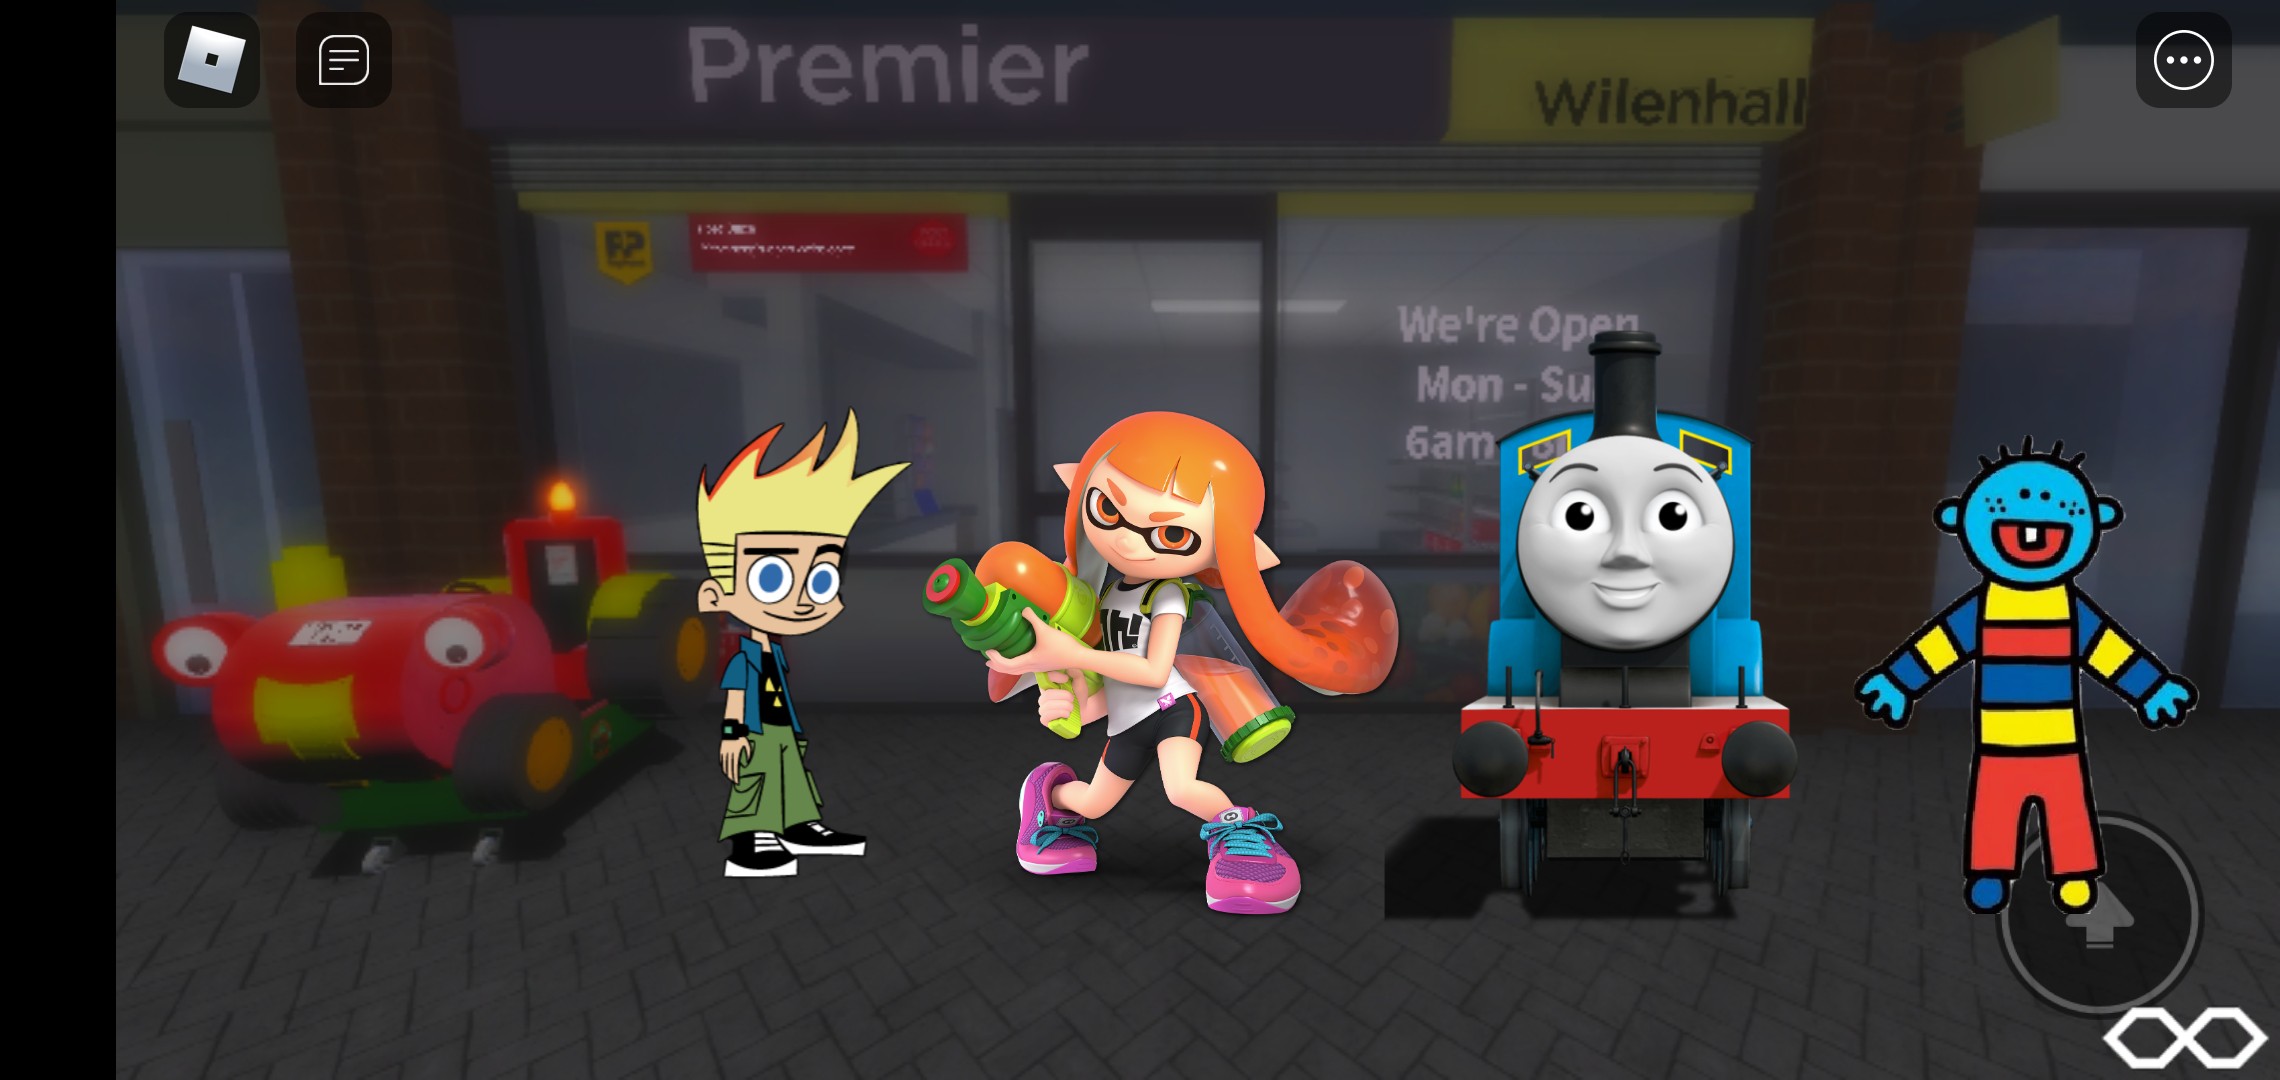 Characters In Midsvill Uk On Roblox By Weilenmoose On Deviantart - roblox video game characters